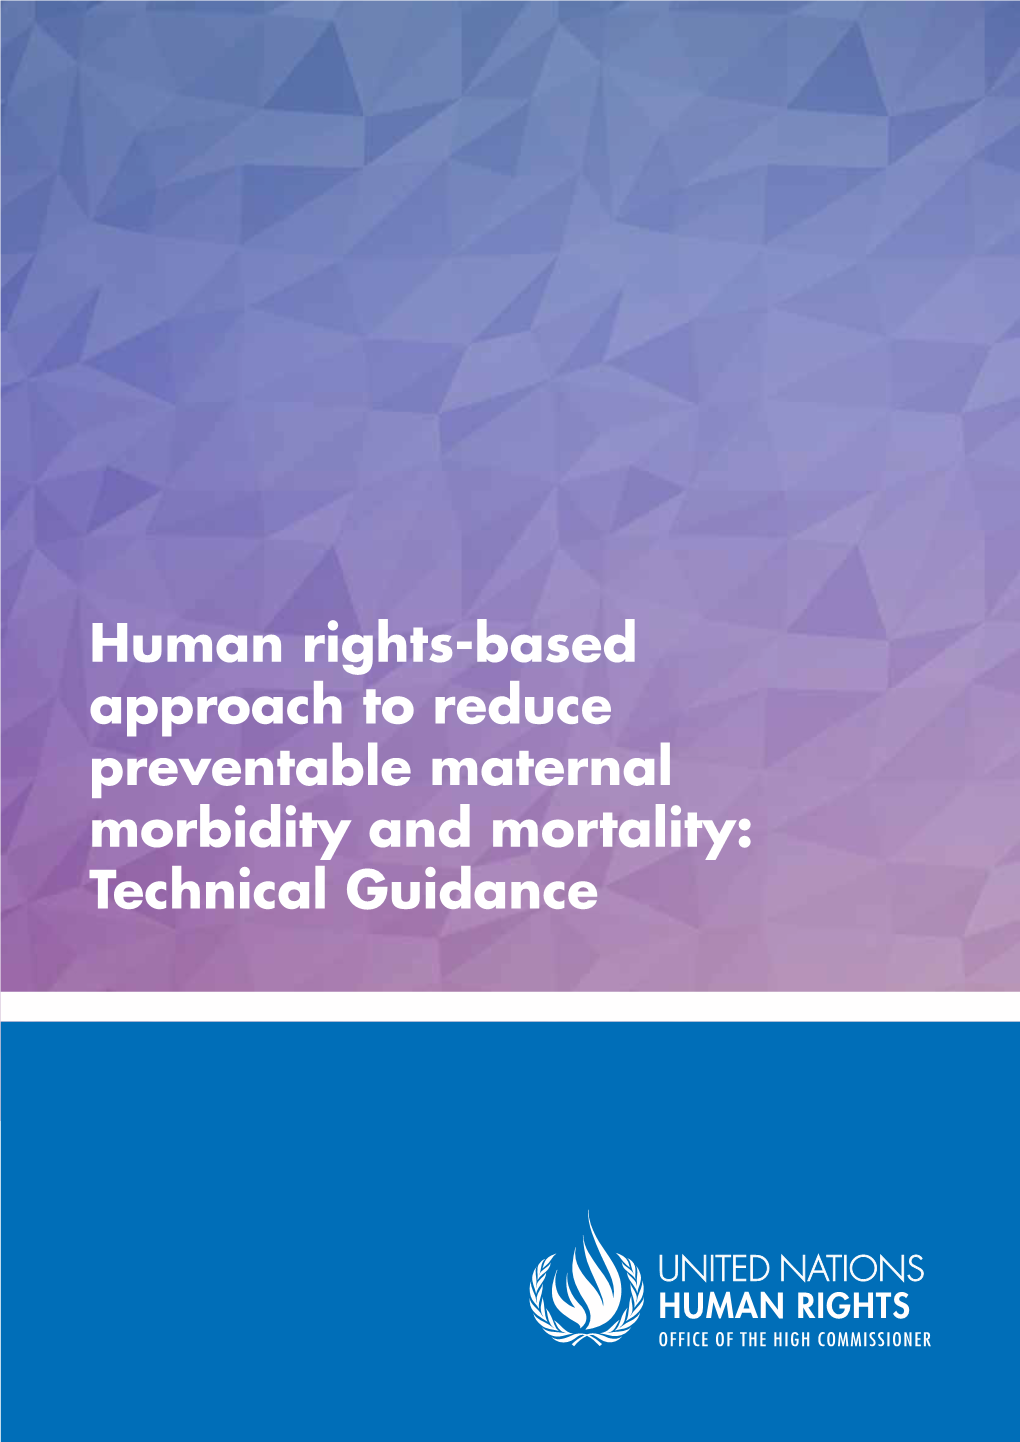 Human Rights-Based Approach to Reduce Preventable Maternal Morbidity and Mortality: Technical Guidance